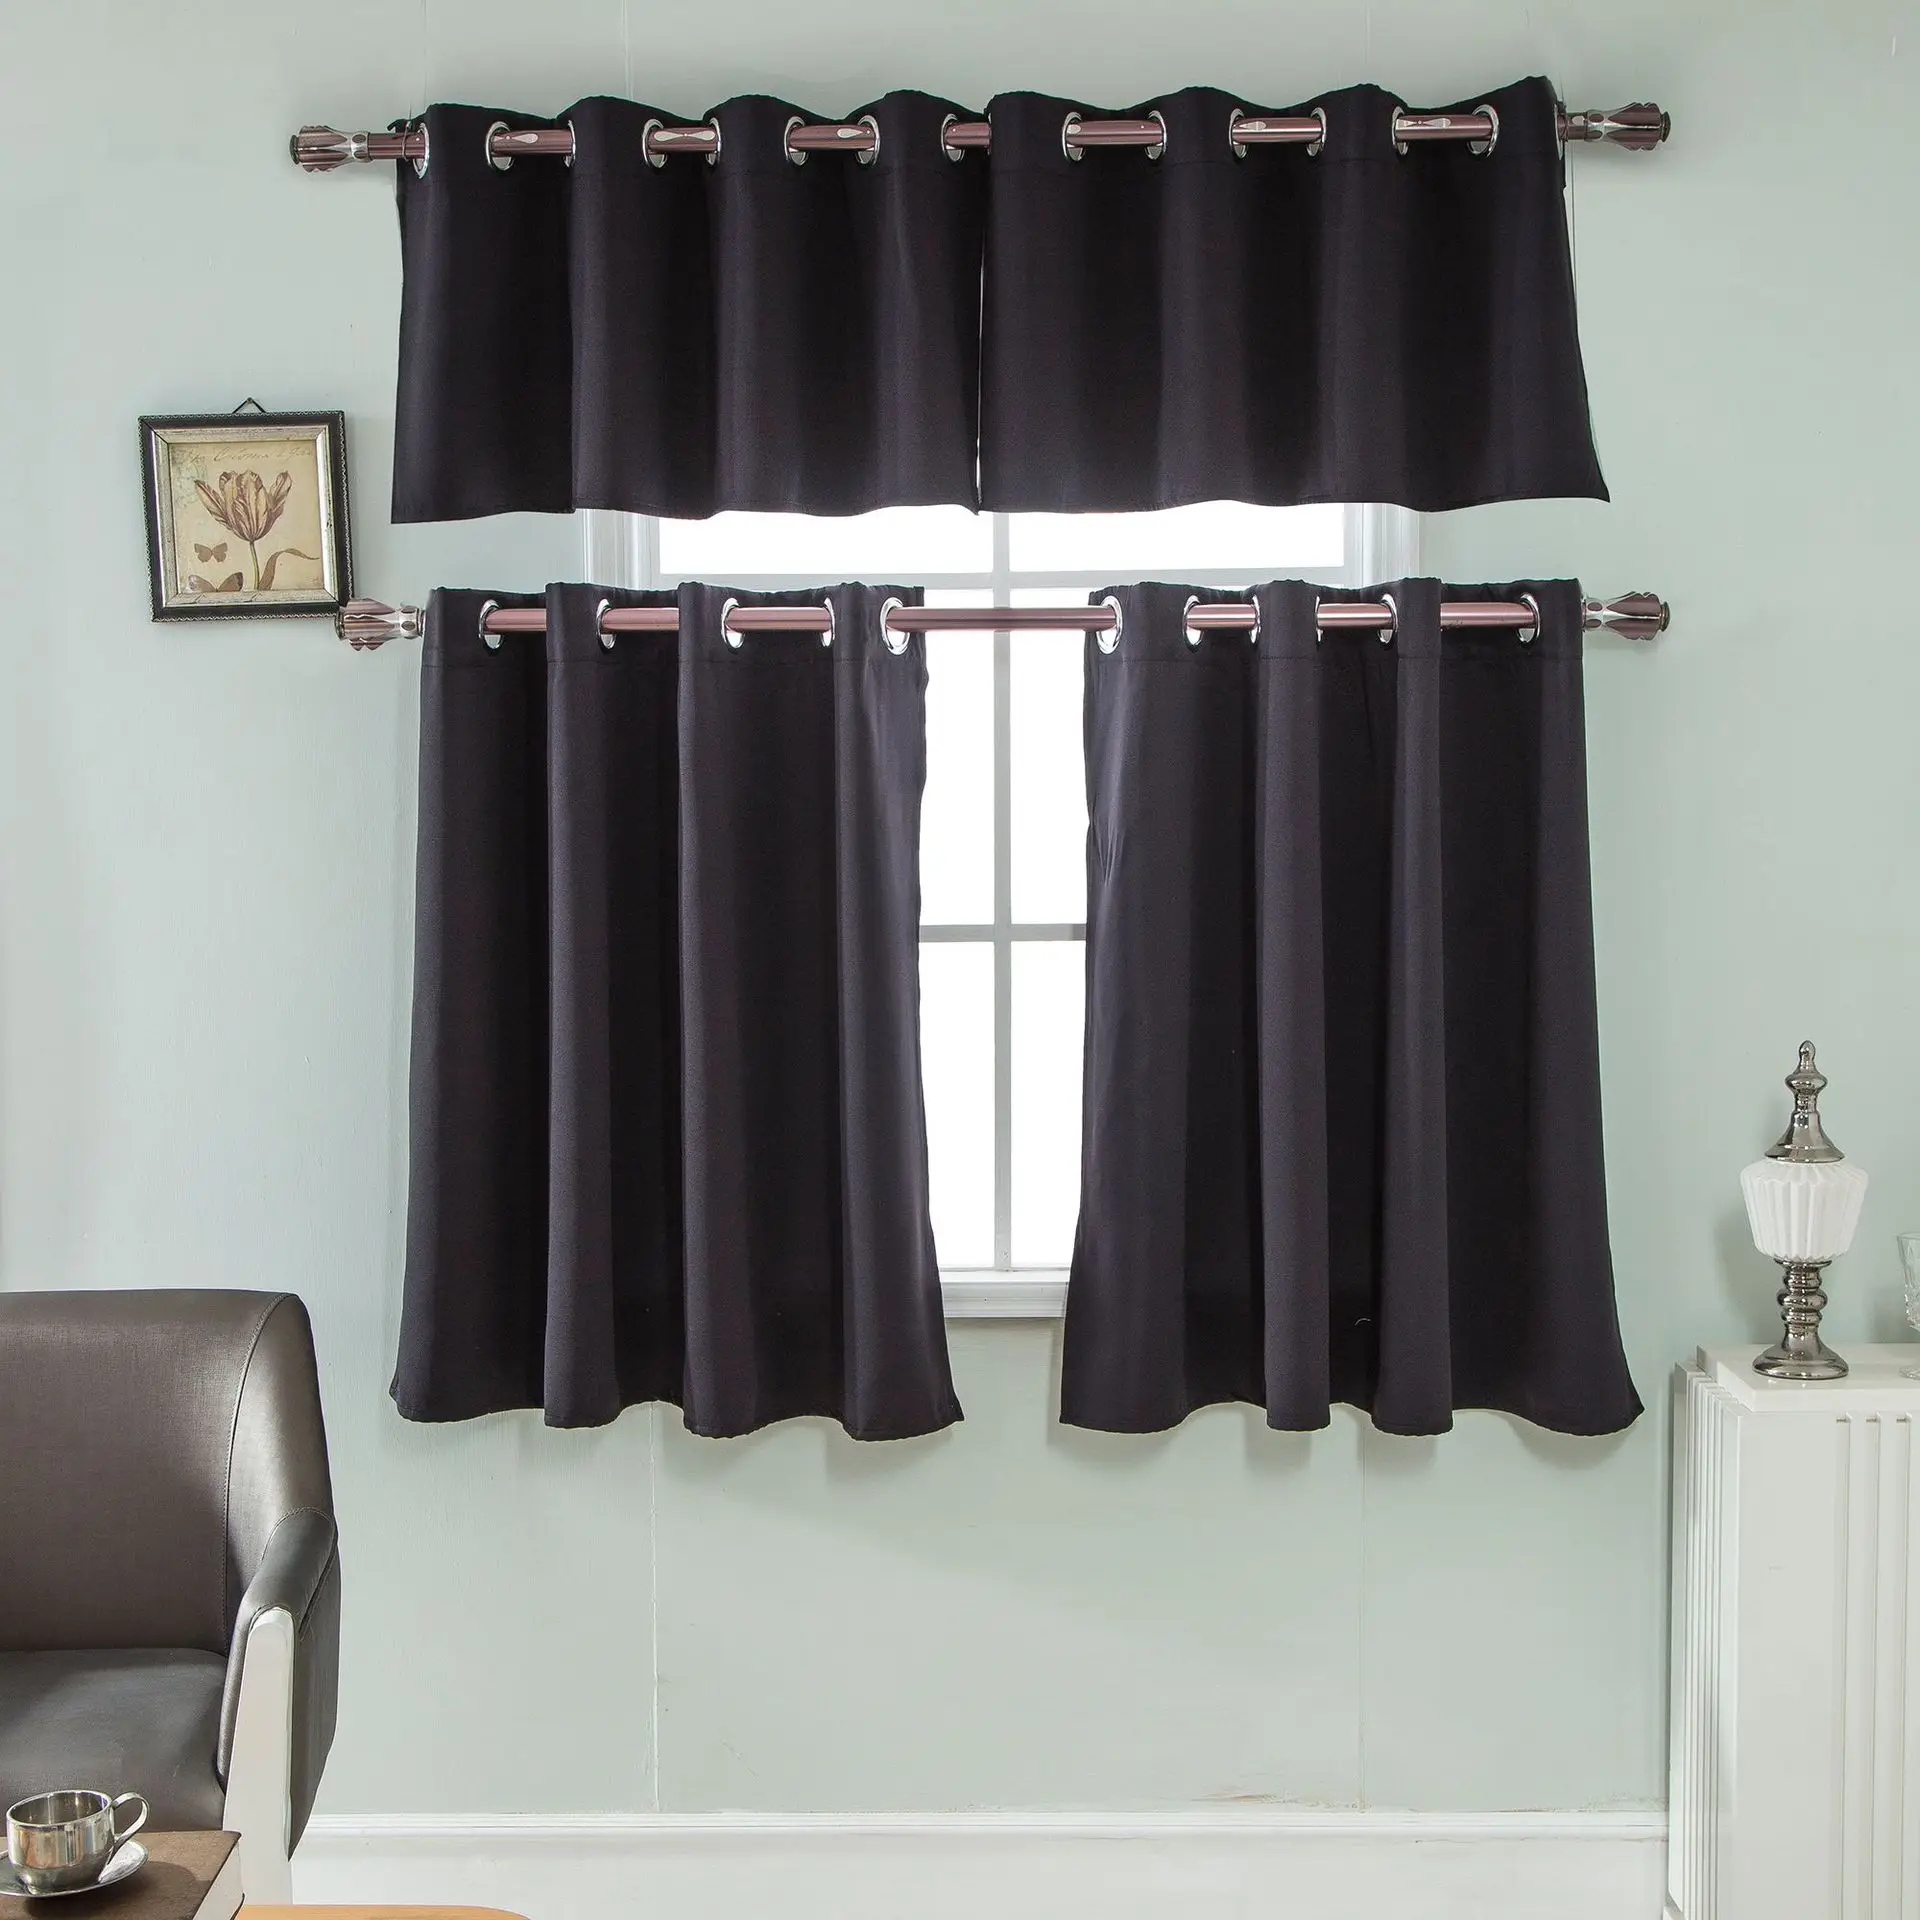 Latest Curtain Design High Quality Brown Fire Resistance Hookless Blackout Kitchen Window Curtain